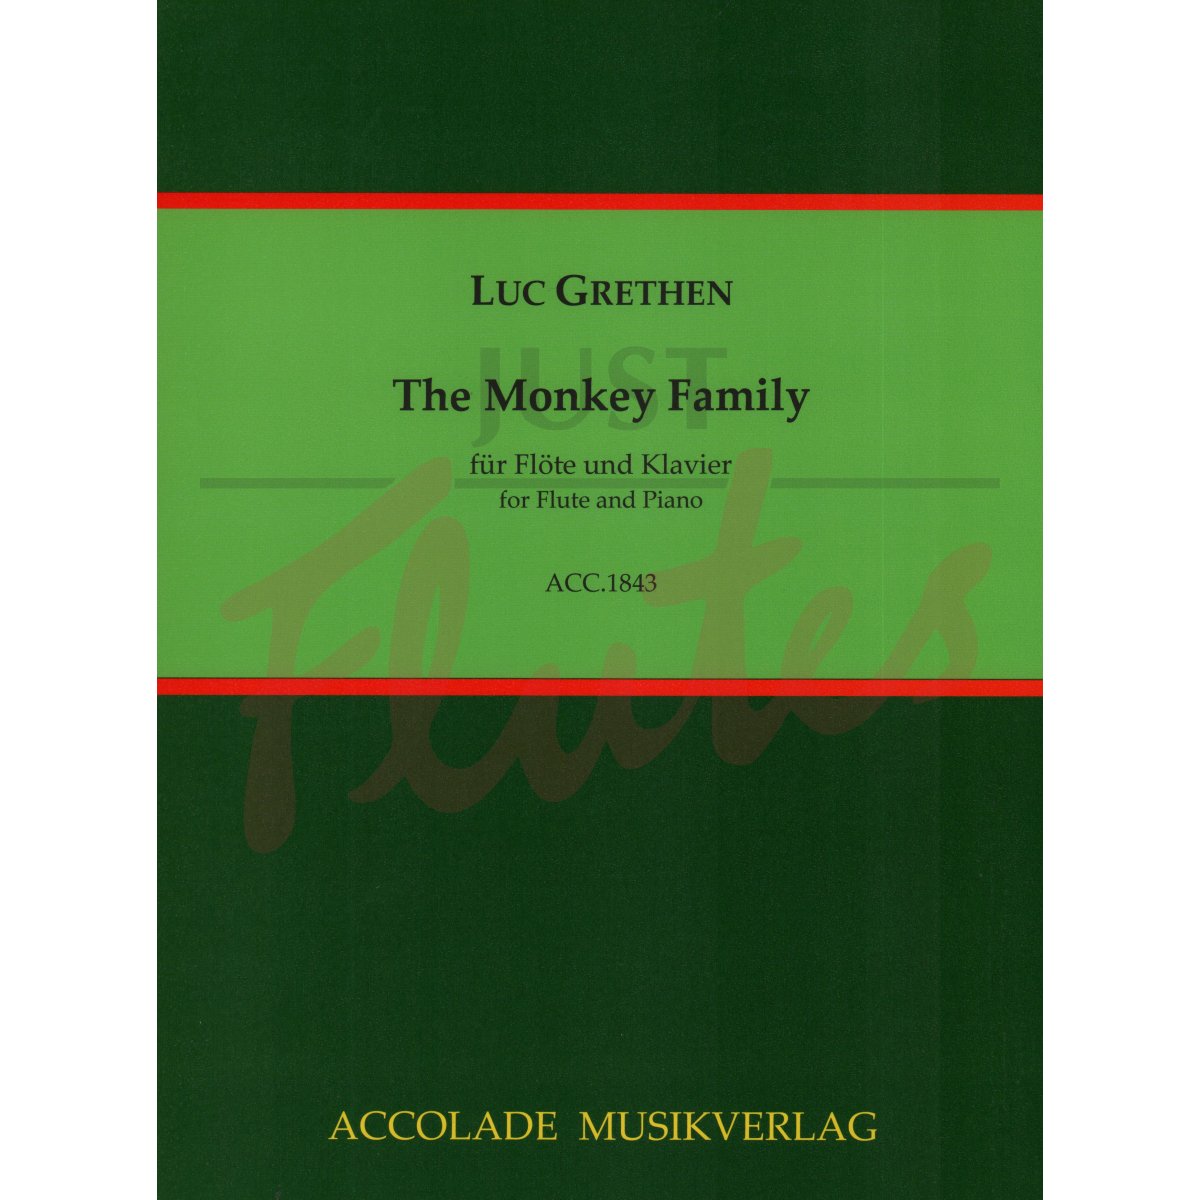 The Monkey Family for Flute and Piano